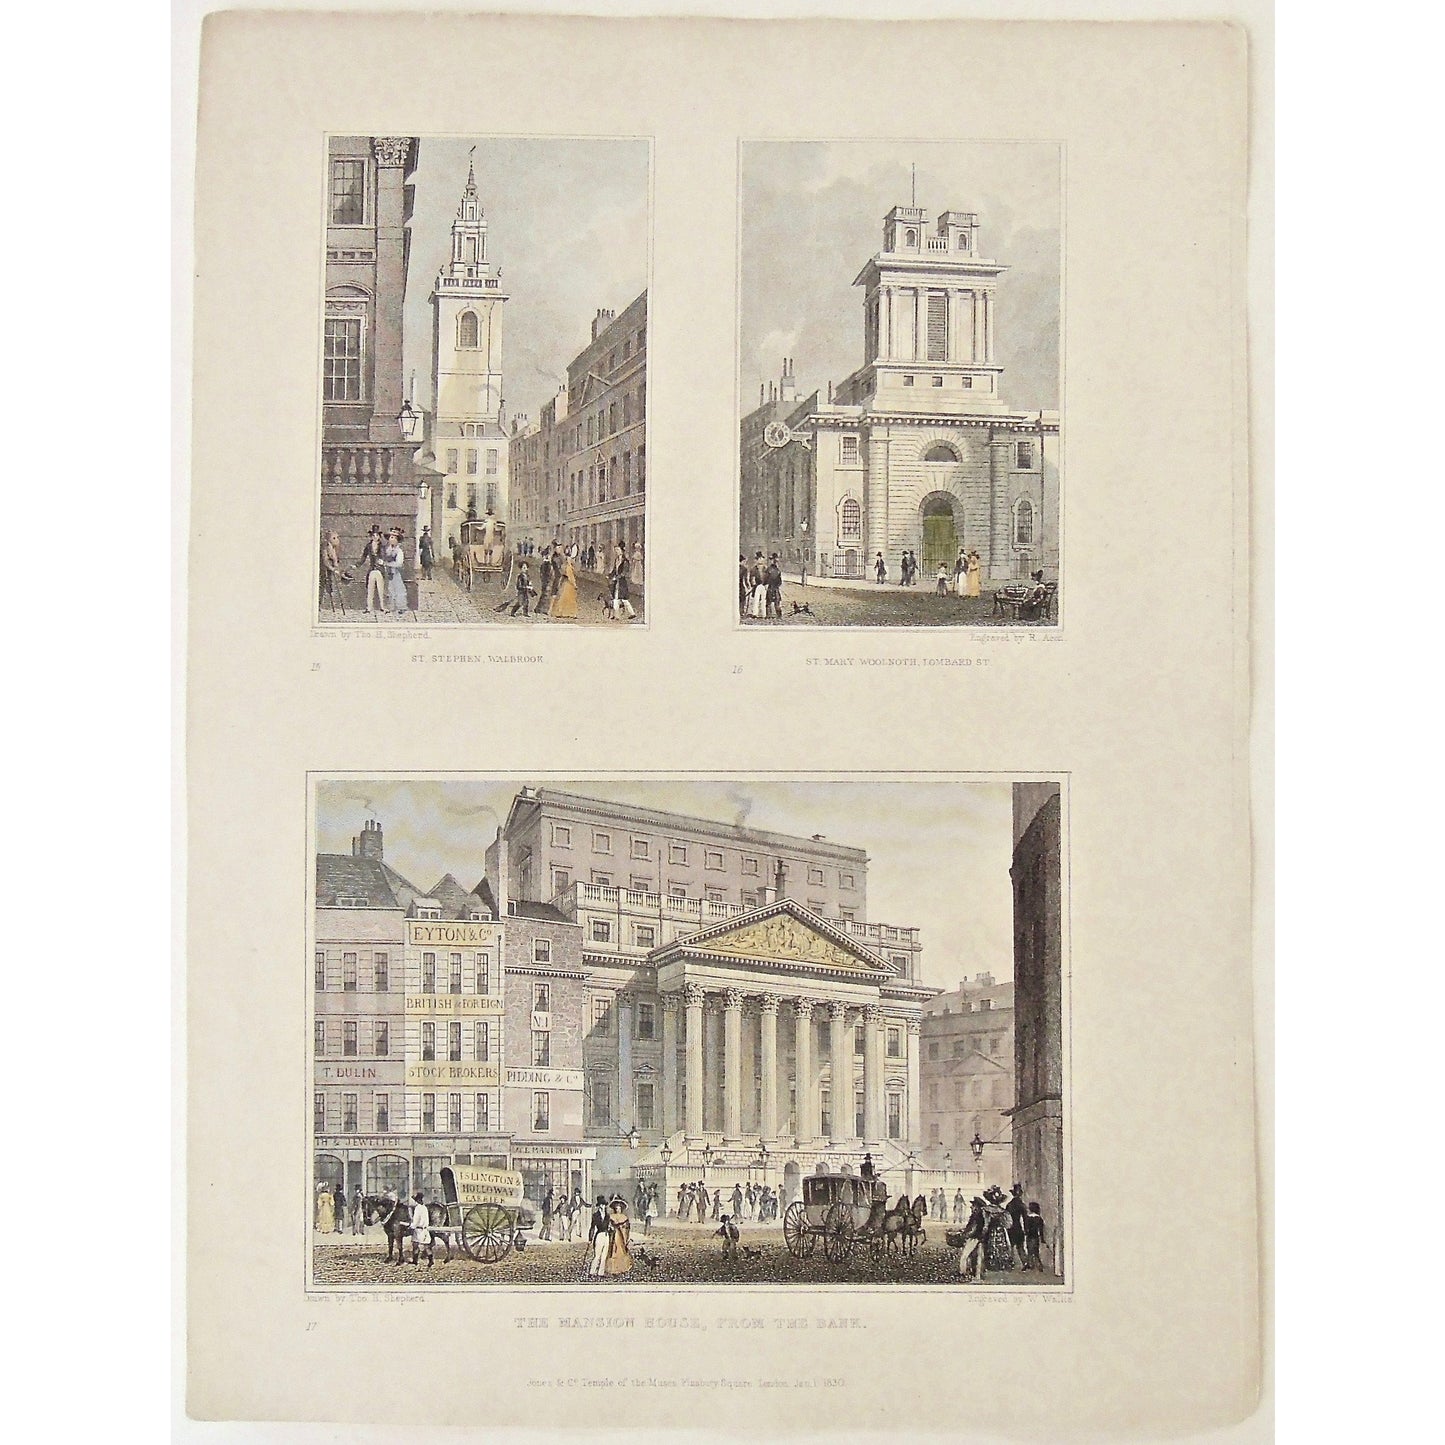 St. Stephen, Walbrook. / St. Mary Woolnoth, Lombard St. / The Mansion House, from the Bank.  (S2-37)